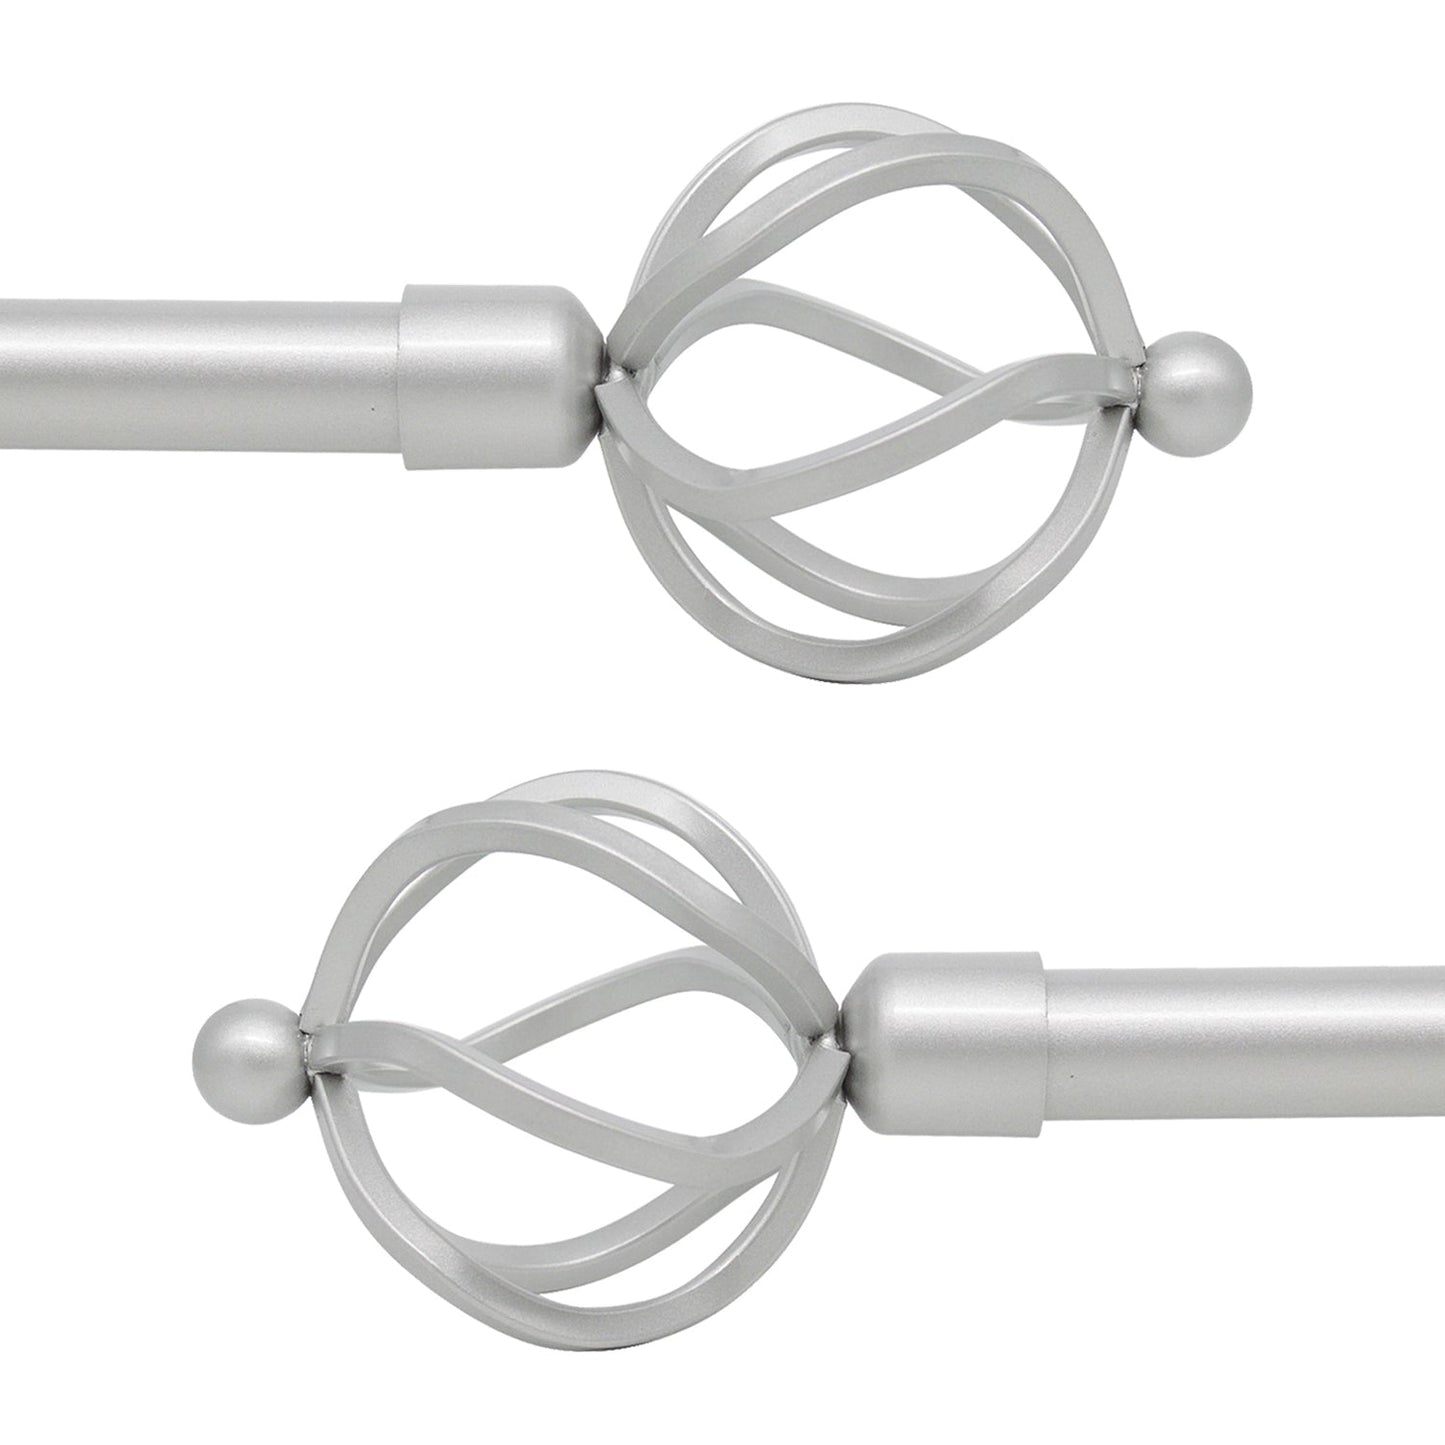 1 inch Nickel Cafe Window Curtain Rod with Twisted Cage Finials, 22" to 42"